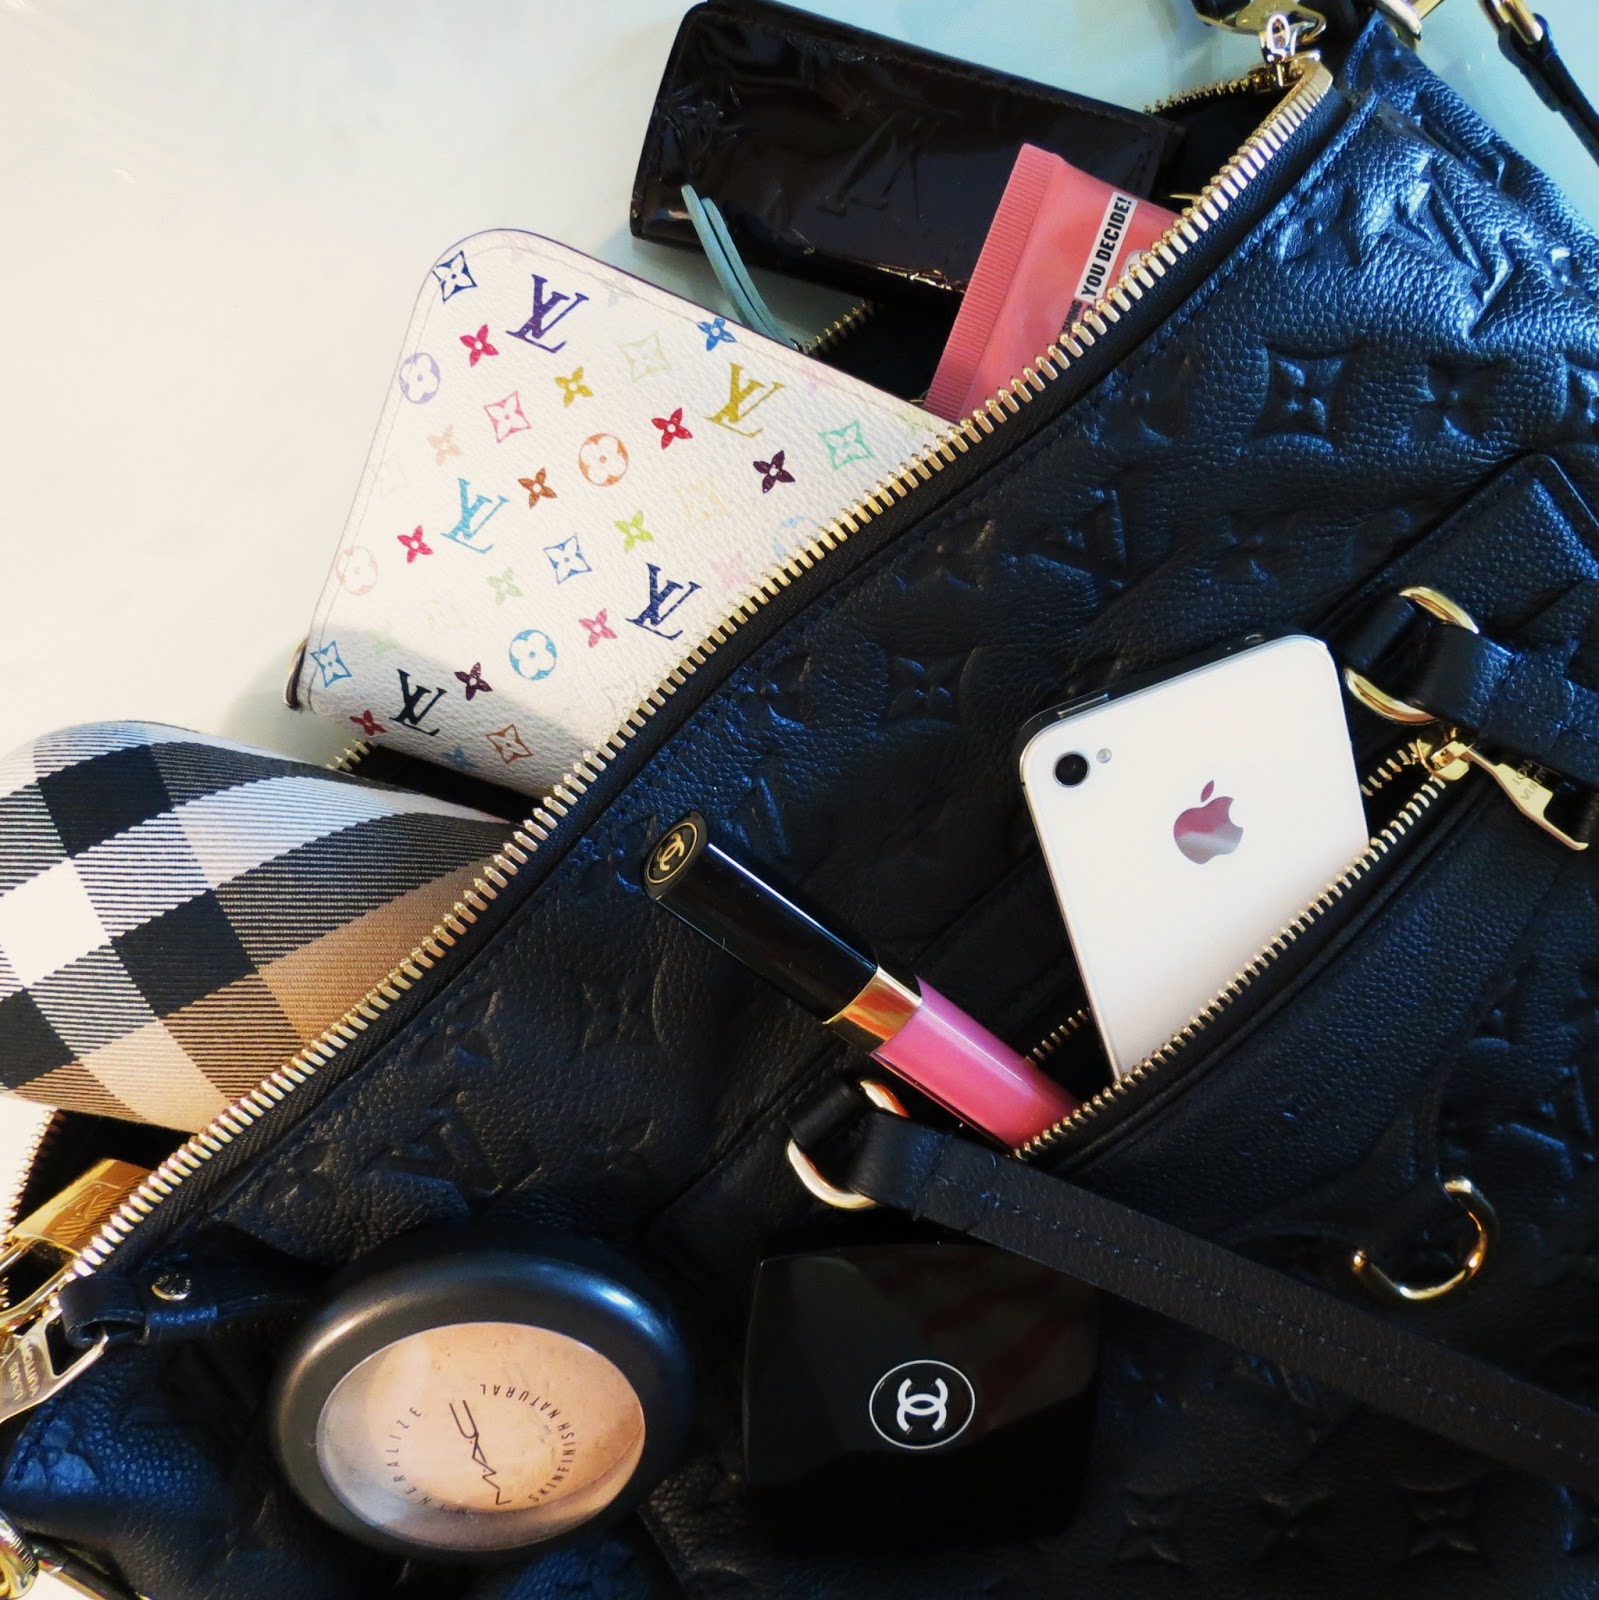 makeupbytiffanyd: What's In My Bag? Louis Vuitton Lumineuse PM Infini